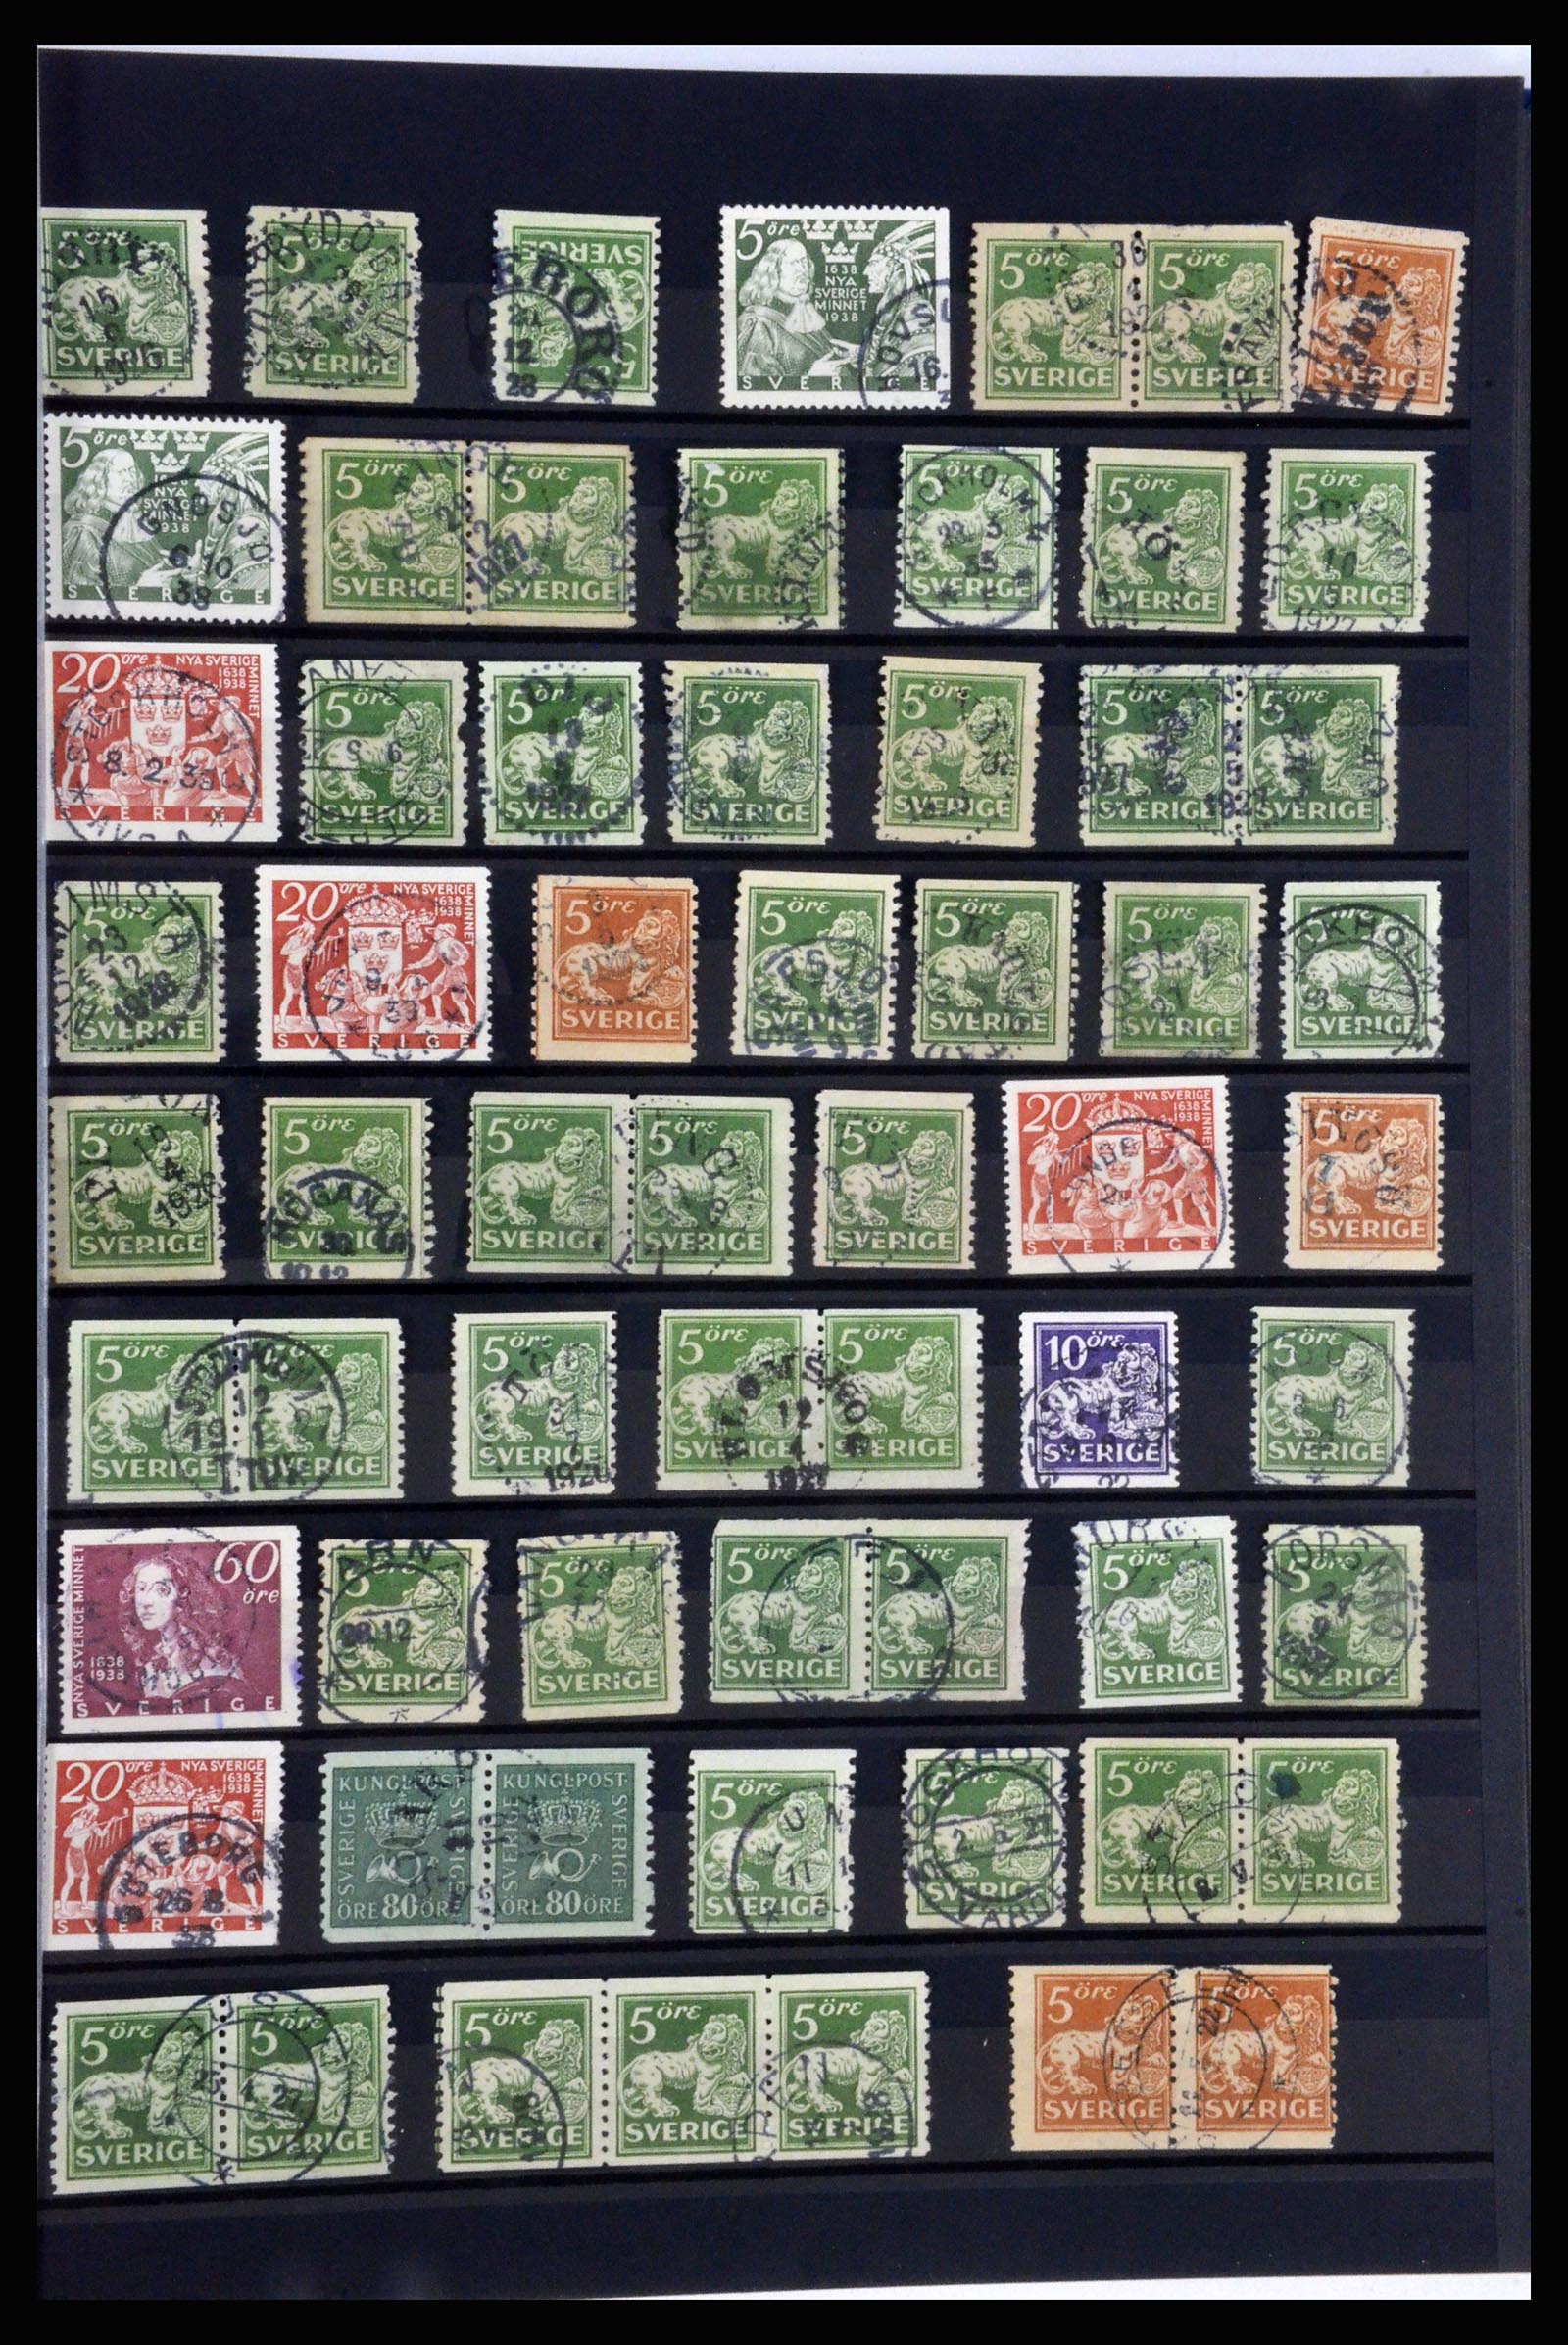 36316 025 - Stamp collection 36316 Sweden cancellations 1920-1938.